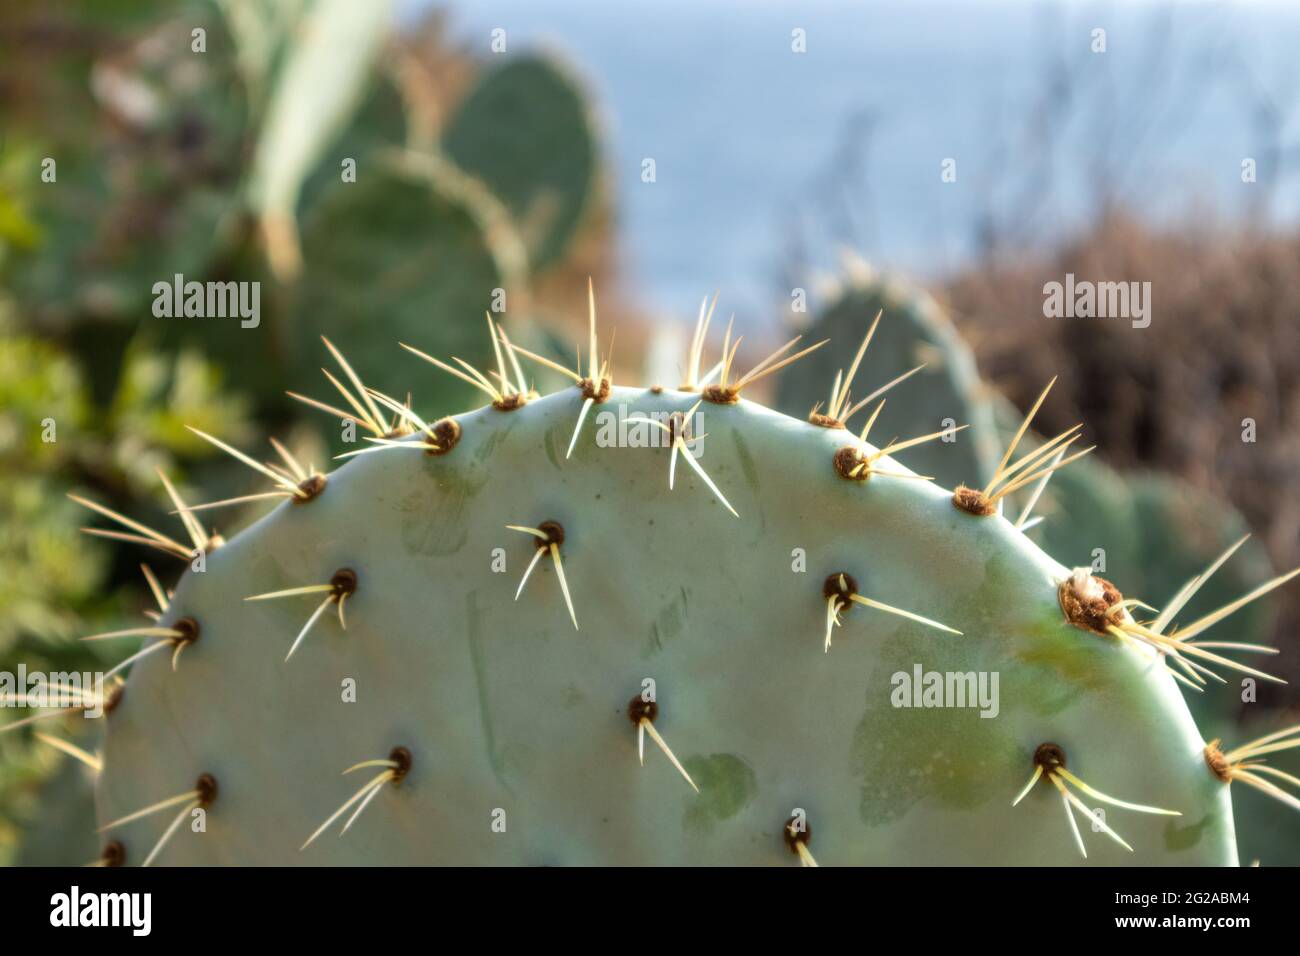 Close-up of prickly pear cactus growing in Greece. Sharp needles on green big leaves in sun. South Europe wild flora Stock Photo